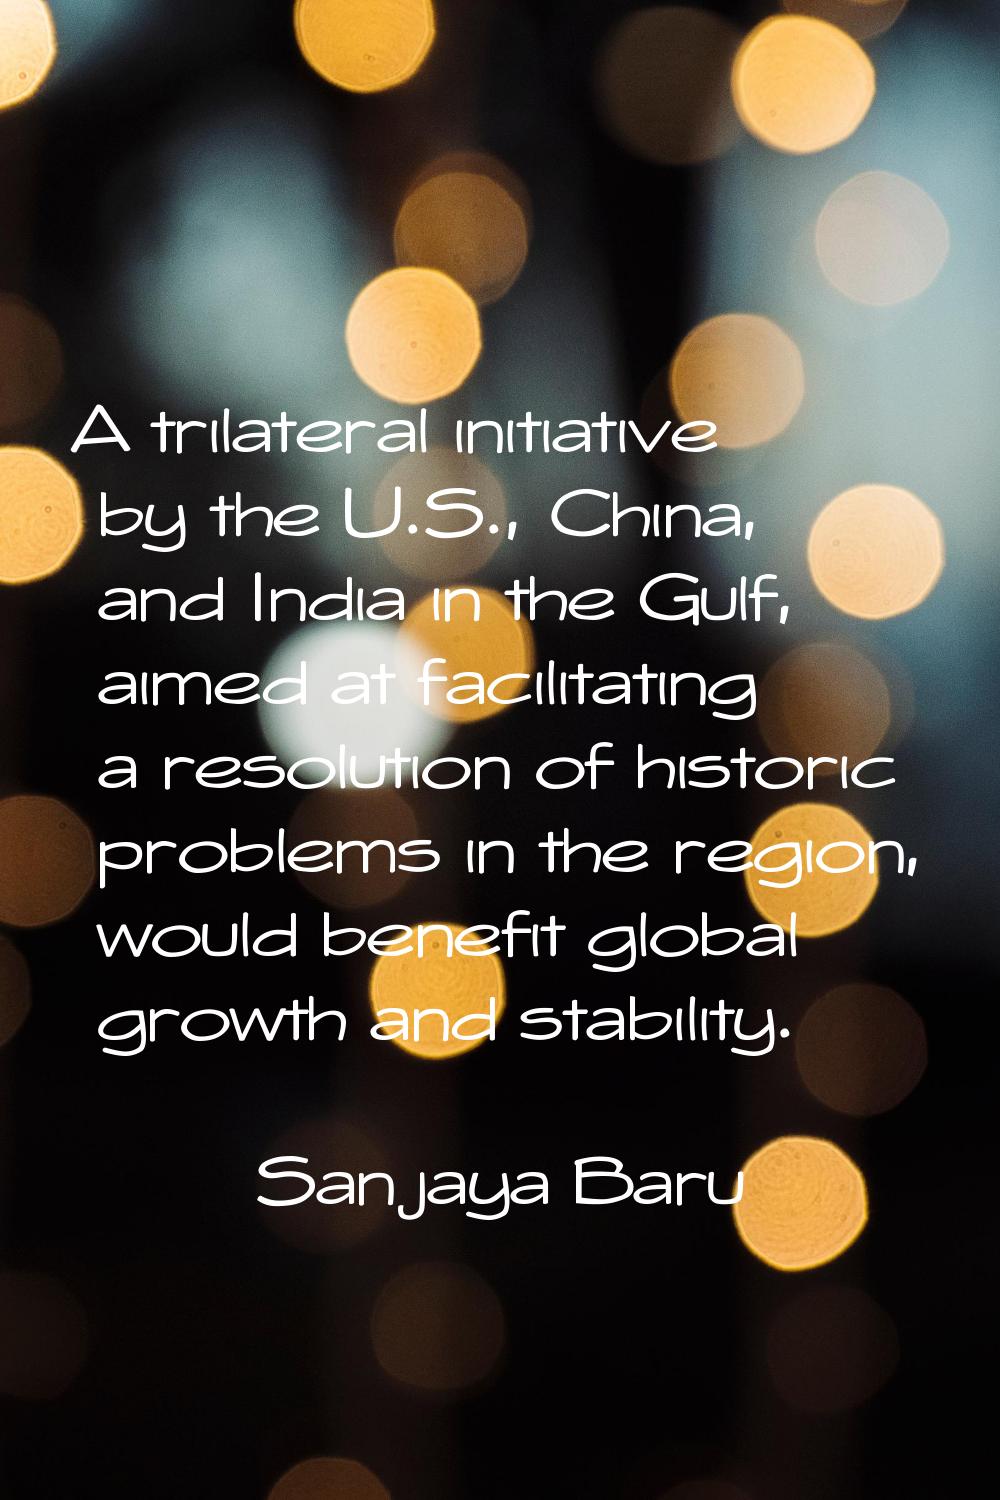 A trilateral initiative by the U.S., China, and India in the Gulf, aimed at facilitating a resoluti